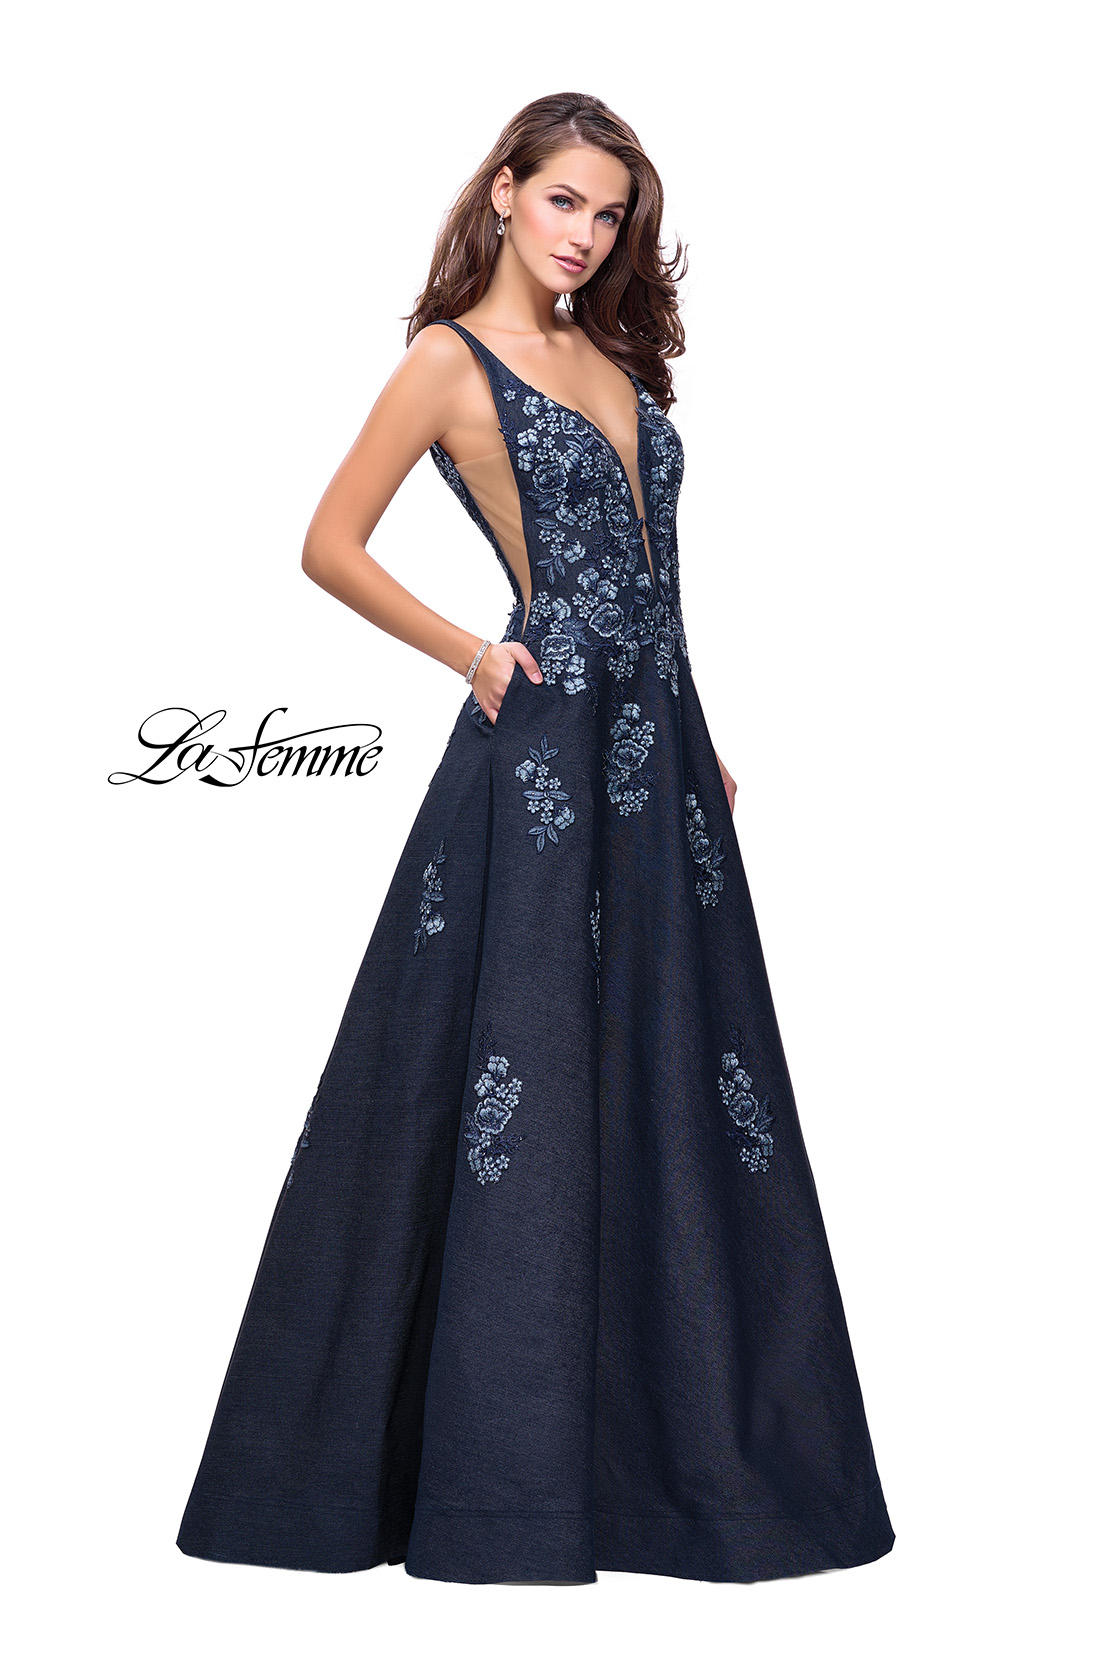 Denim Prom Dress with Floral Details and A Line Skirt